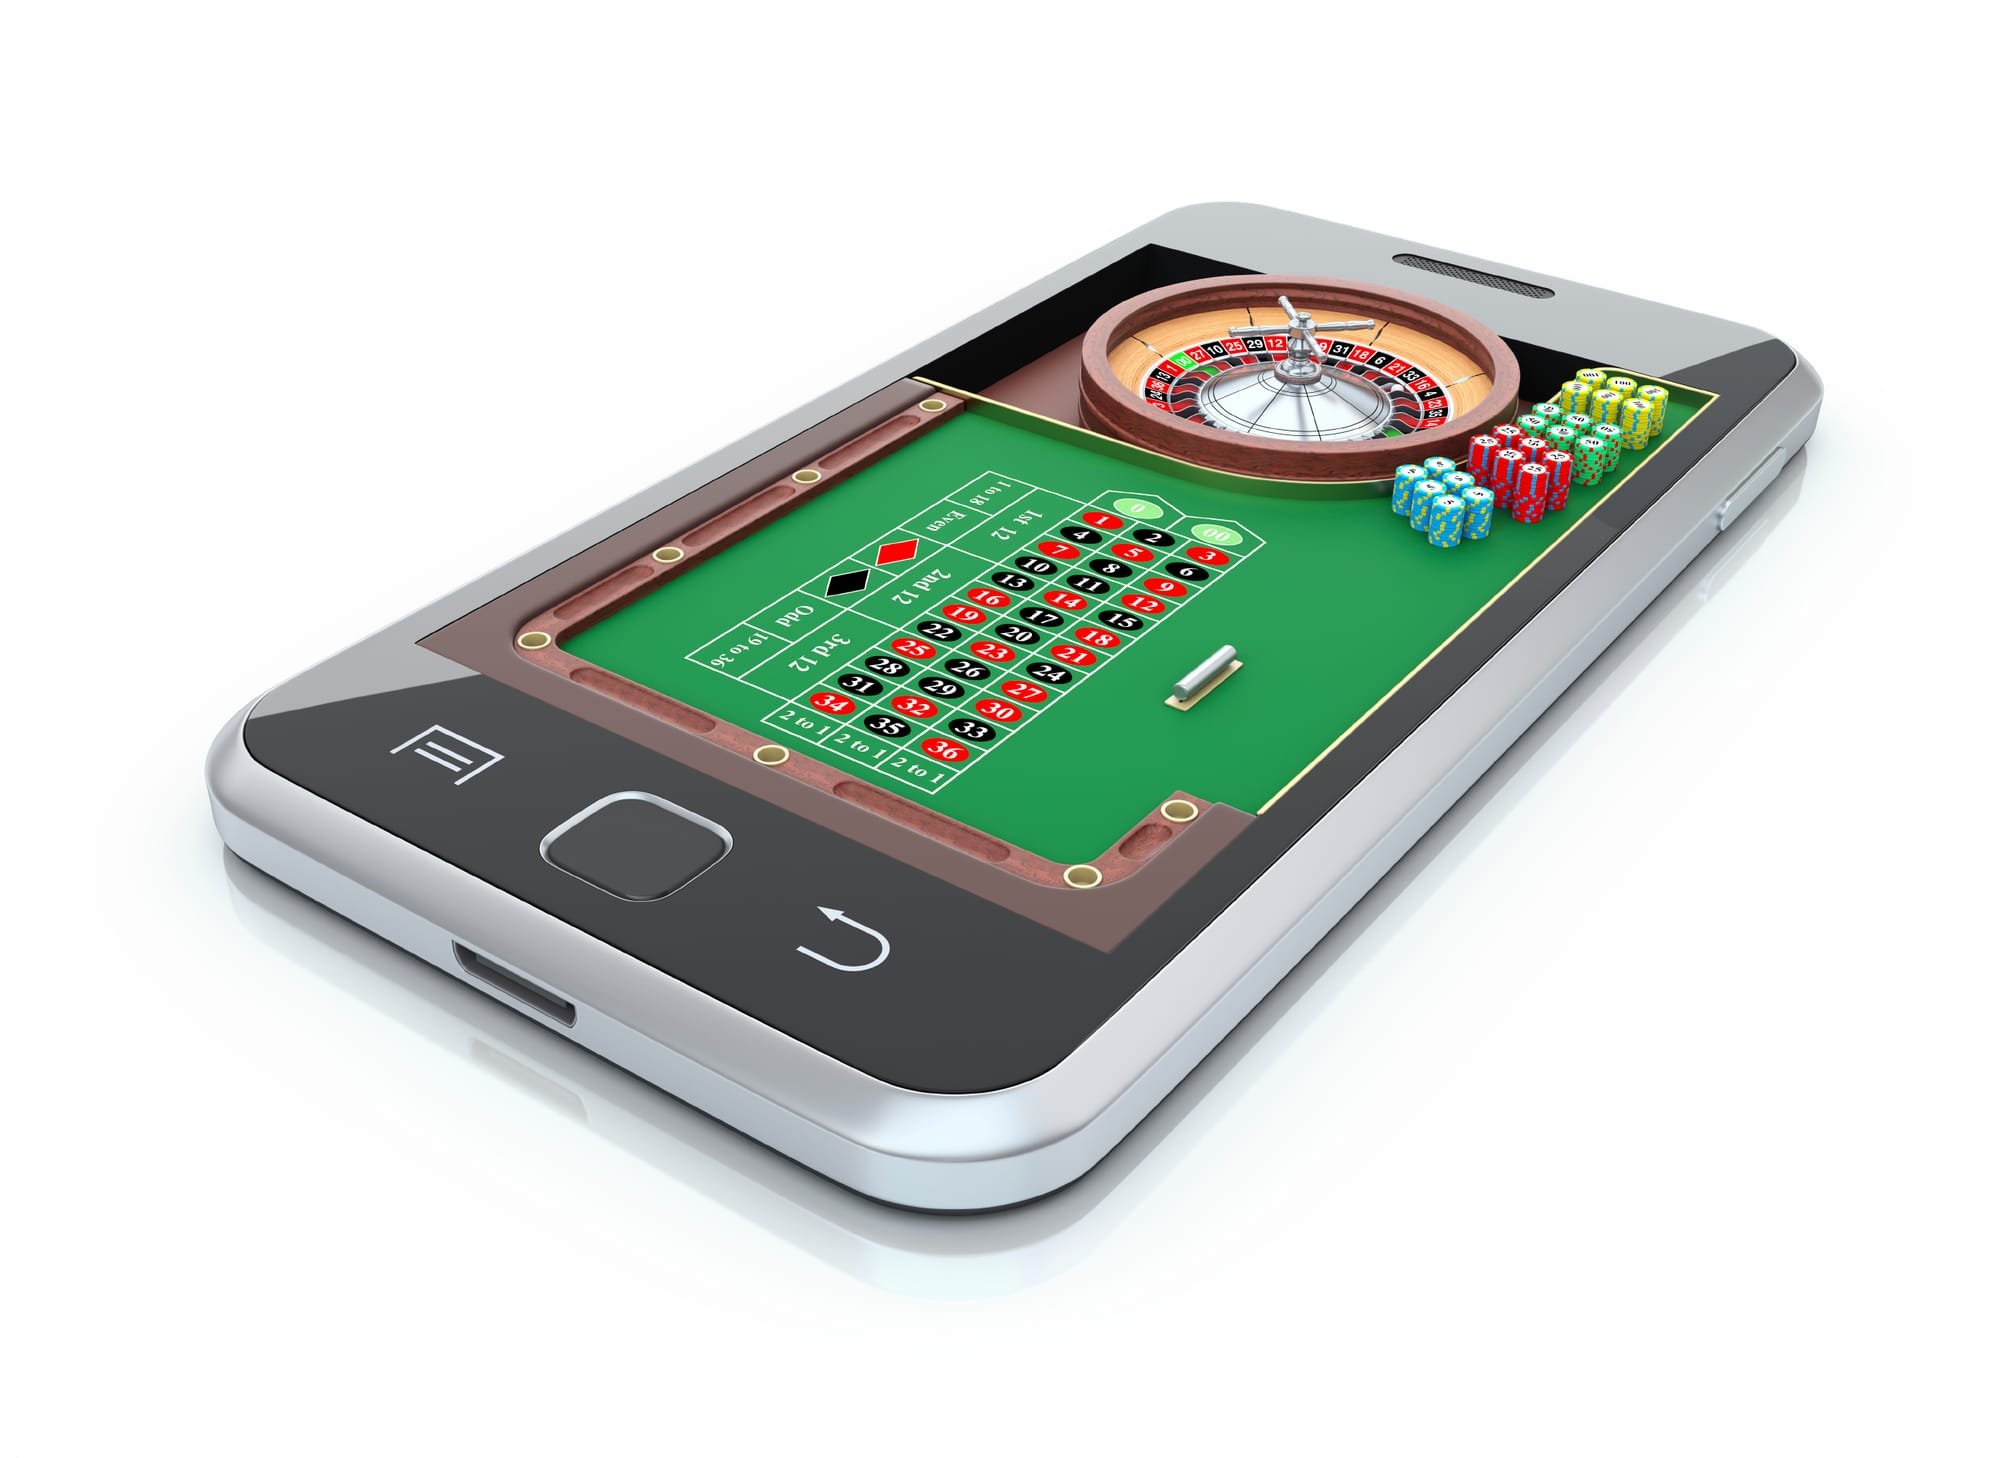 Rb88 \u2013 Best Place To Play Your Favorite Game And Get Money - Casino Slots Guide